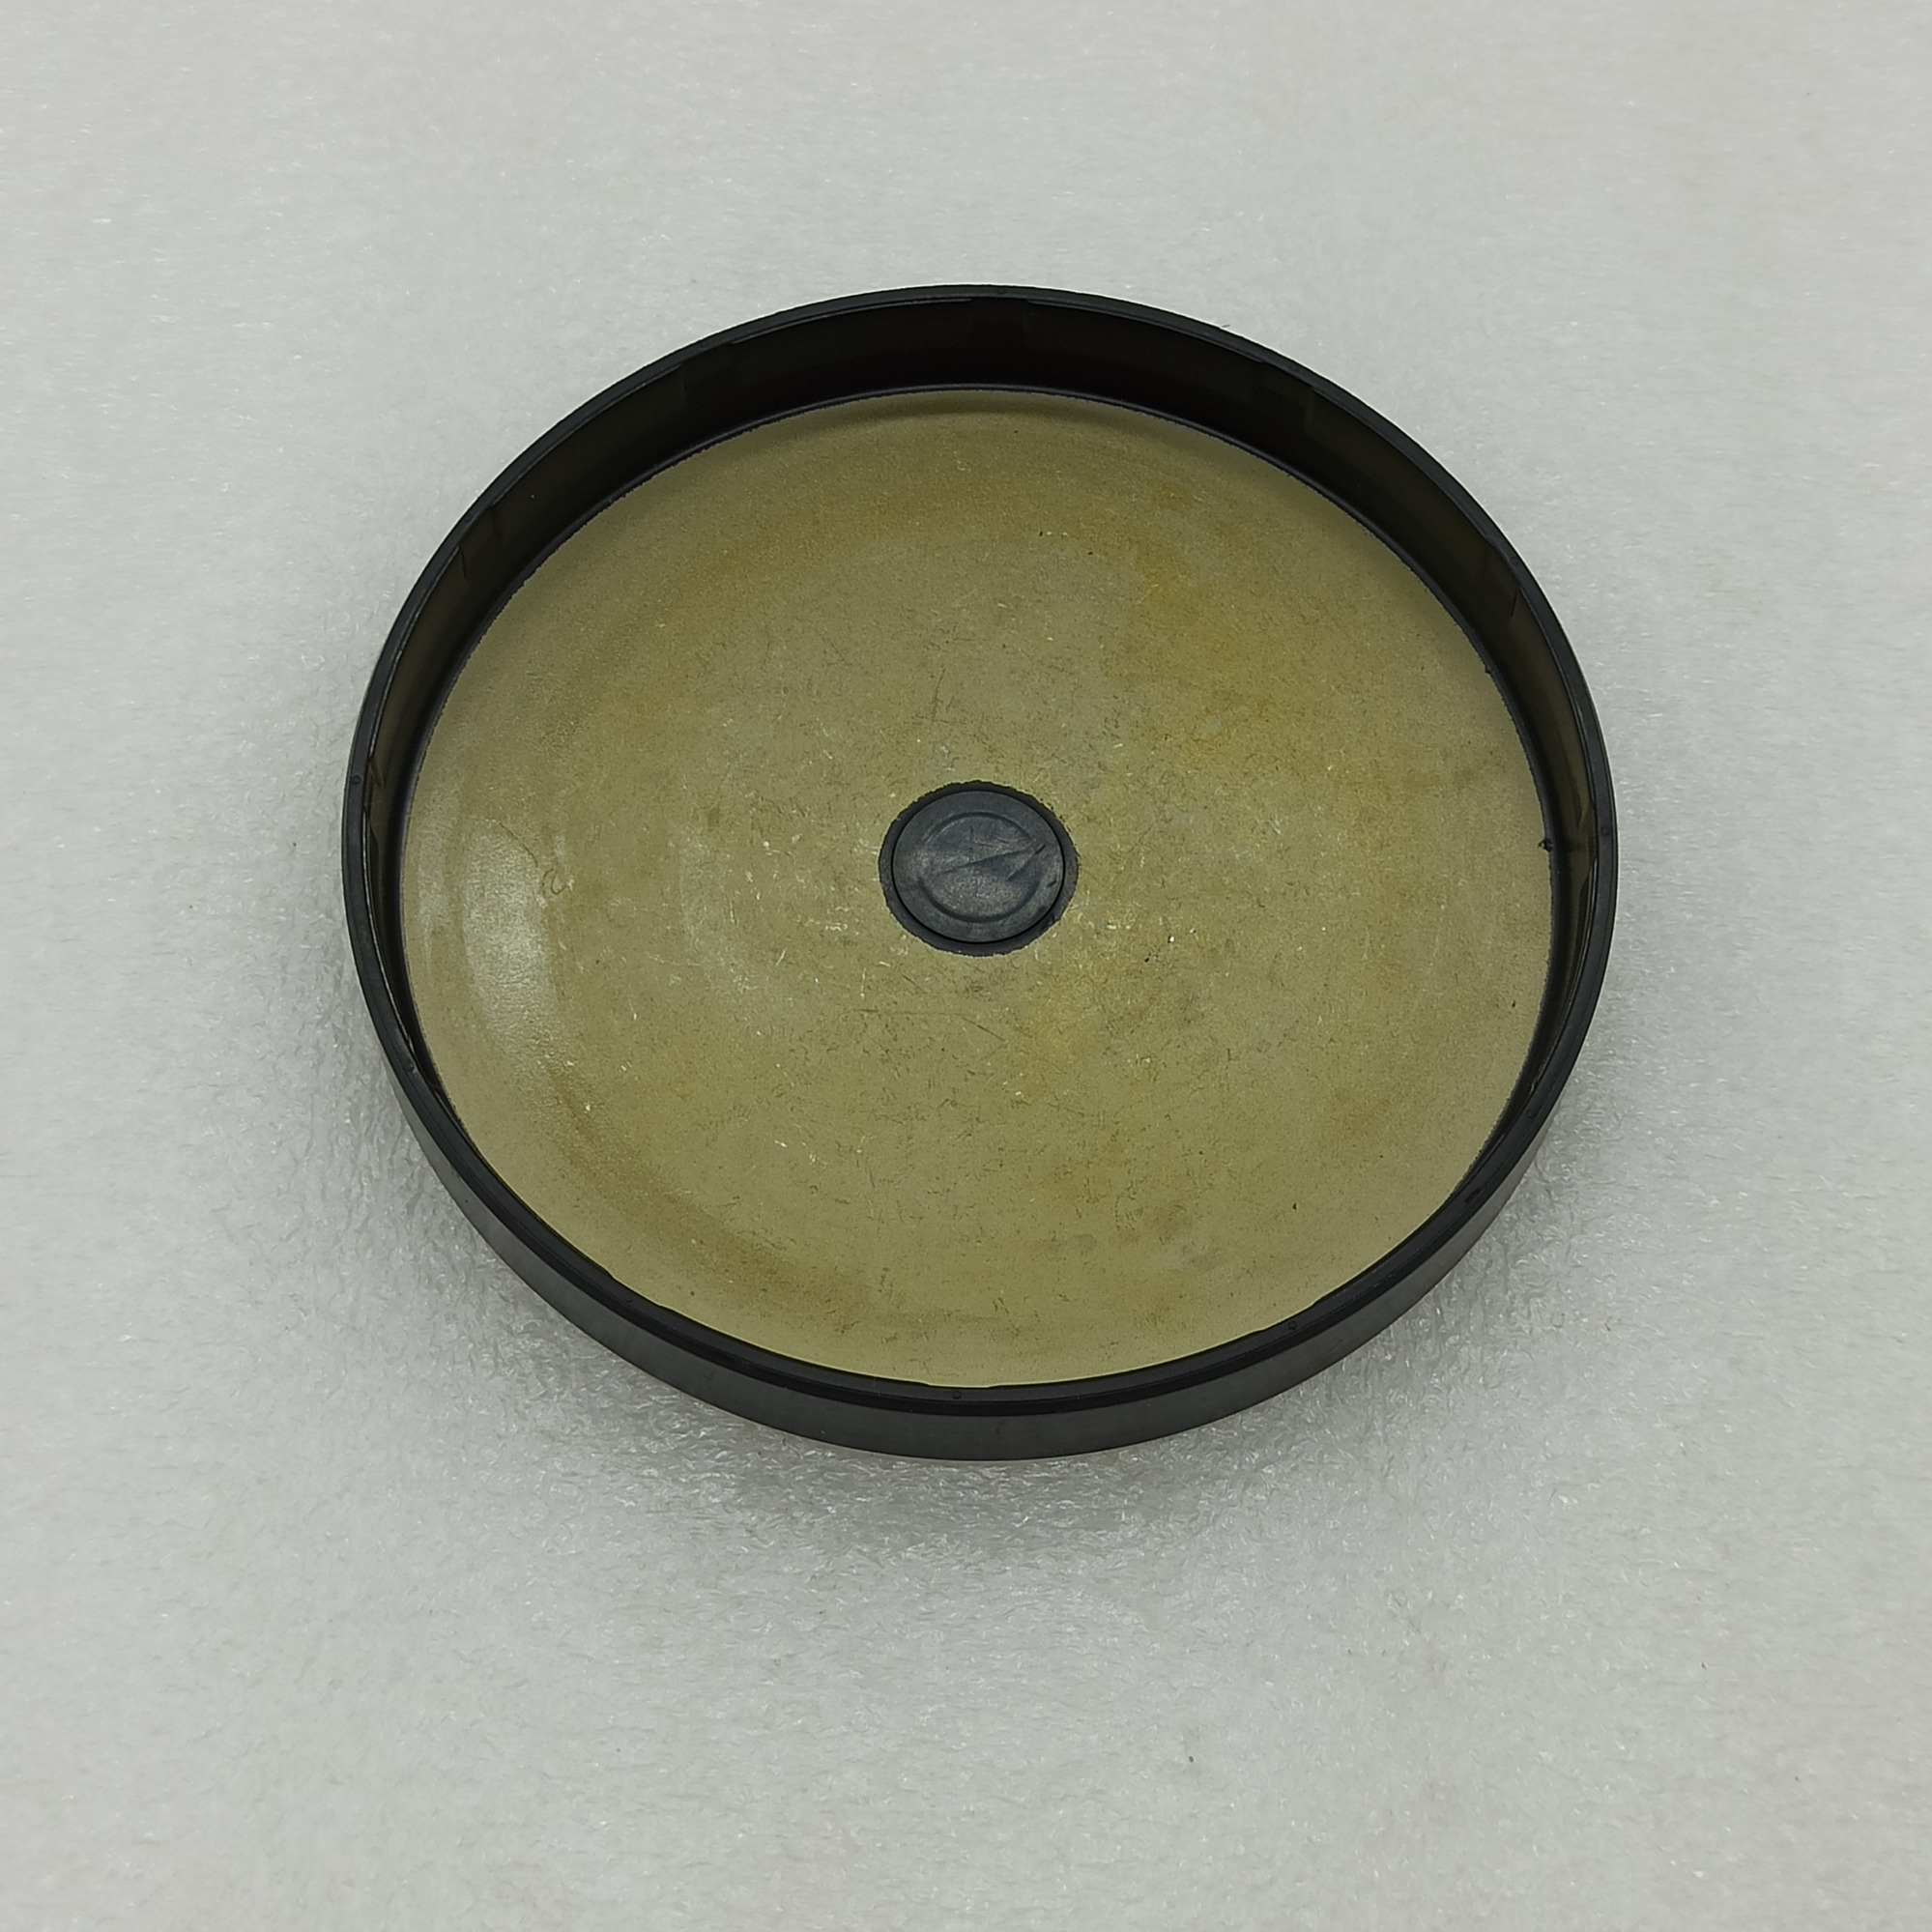 0DN-0014-OEM 0DN rear cover seal OEM 0DN 301 257, can fit 0CK new and OE